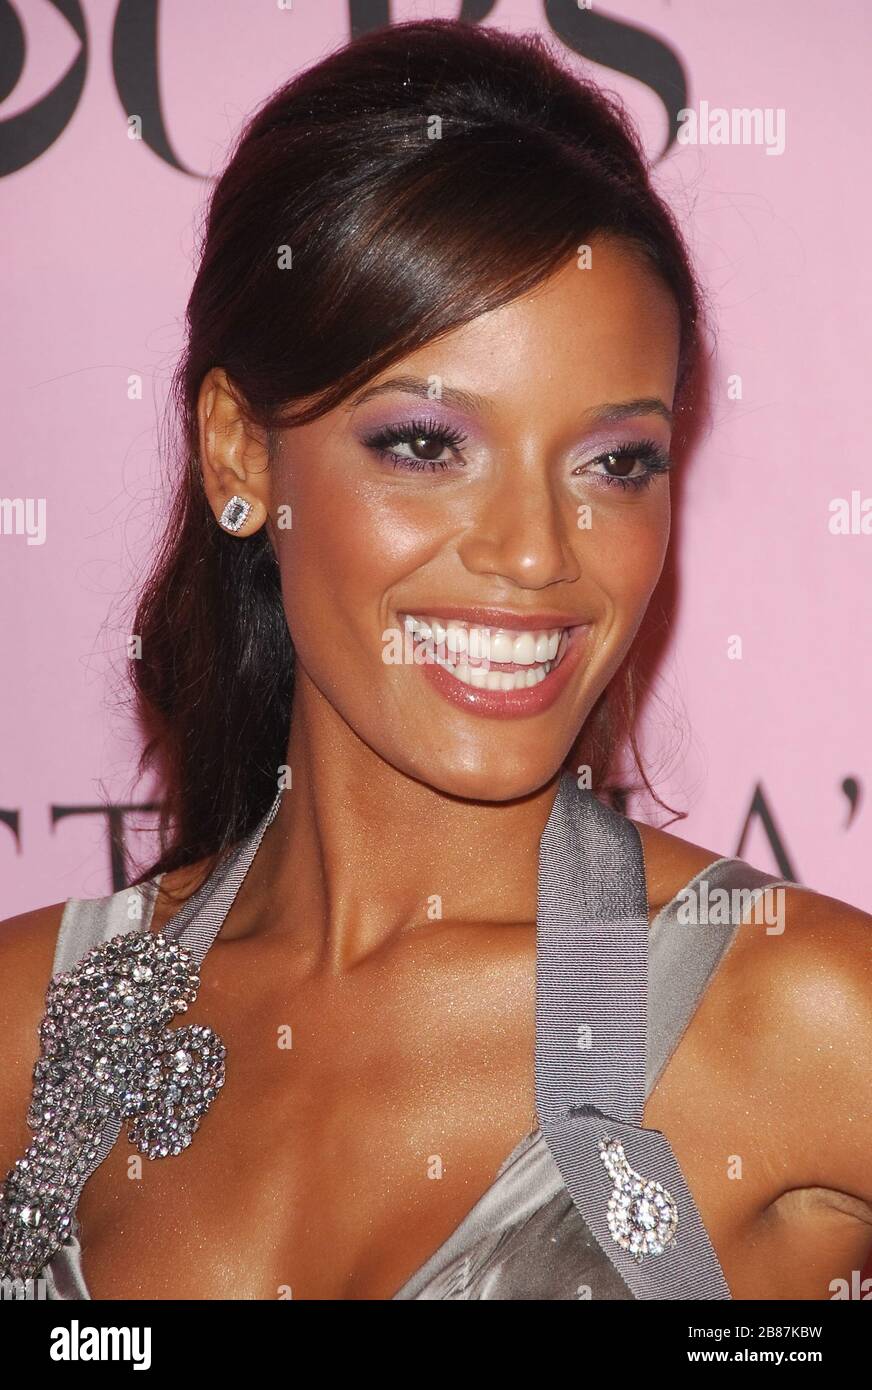 Selita Ebanks at the Victoria's Secret Fashion Show - Arrivals held at the Kodak Theater in Hollywood, CA. The event took place on Thursday, November 16, 2006.  Photo by: SBM / PictureLux - File Reference # 33984-9560SBMPLX Stock Photo